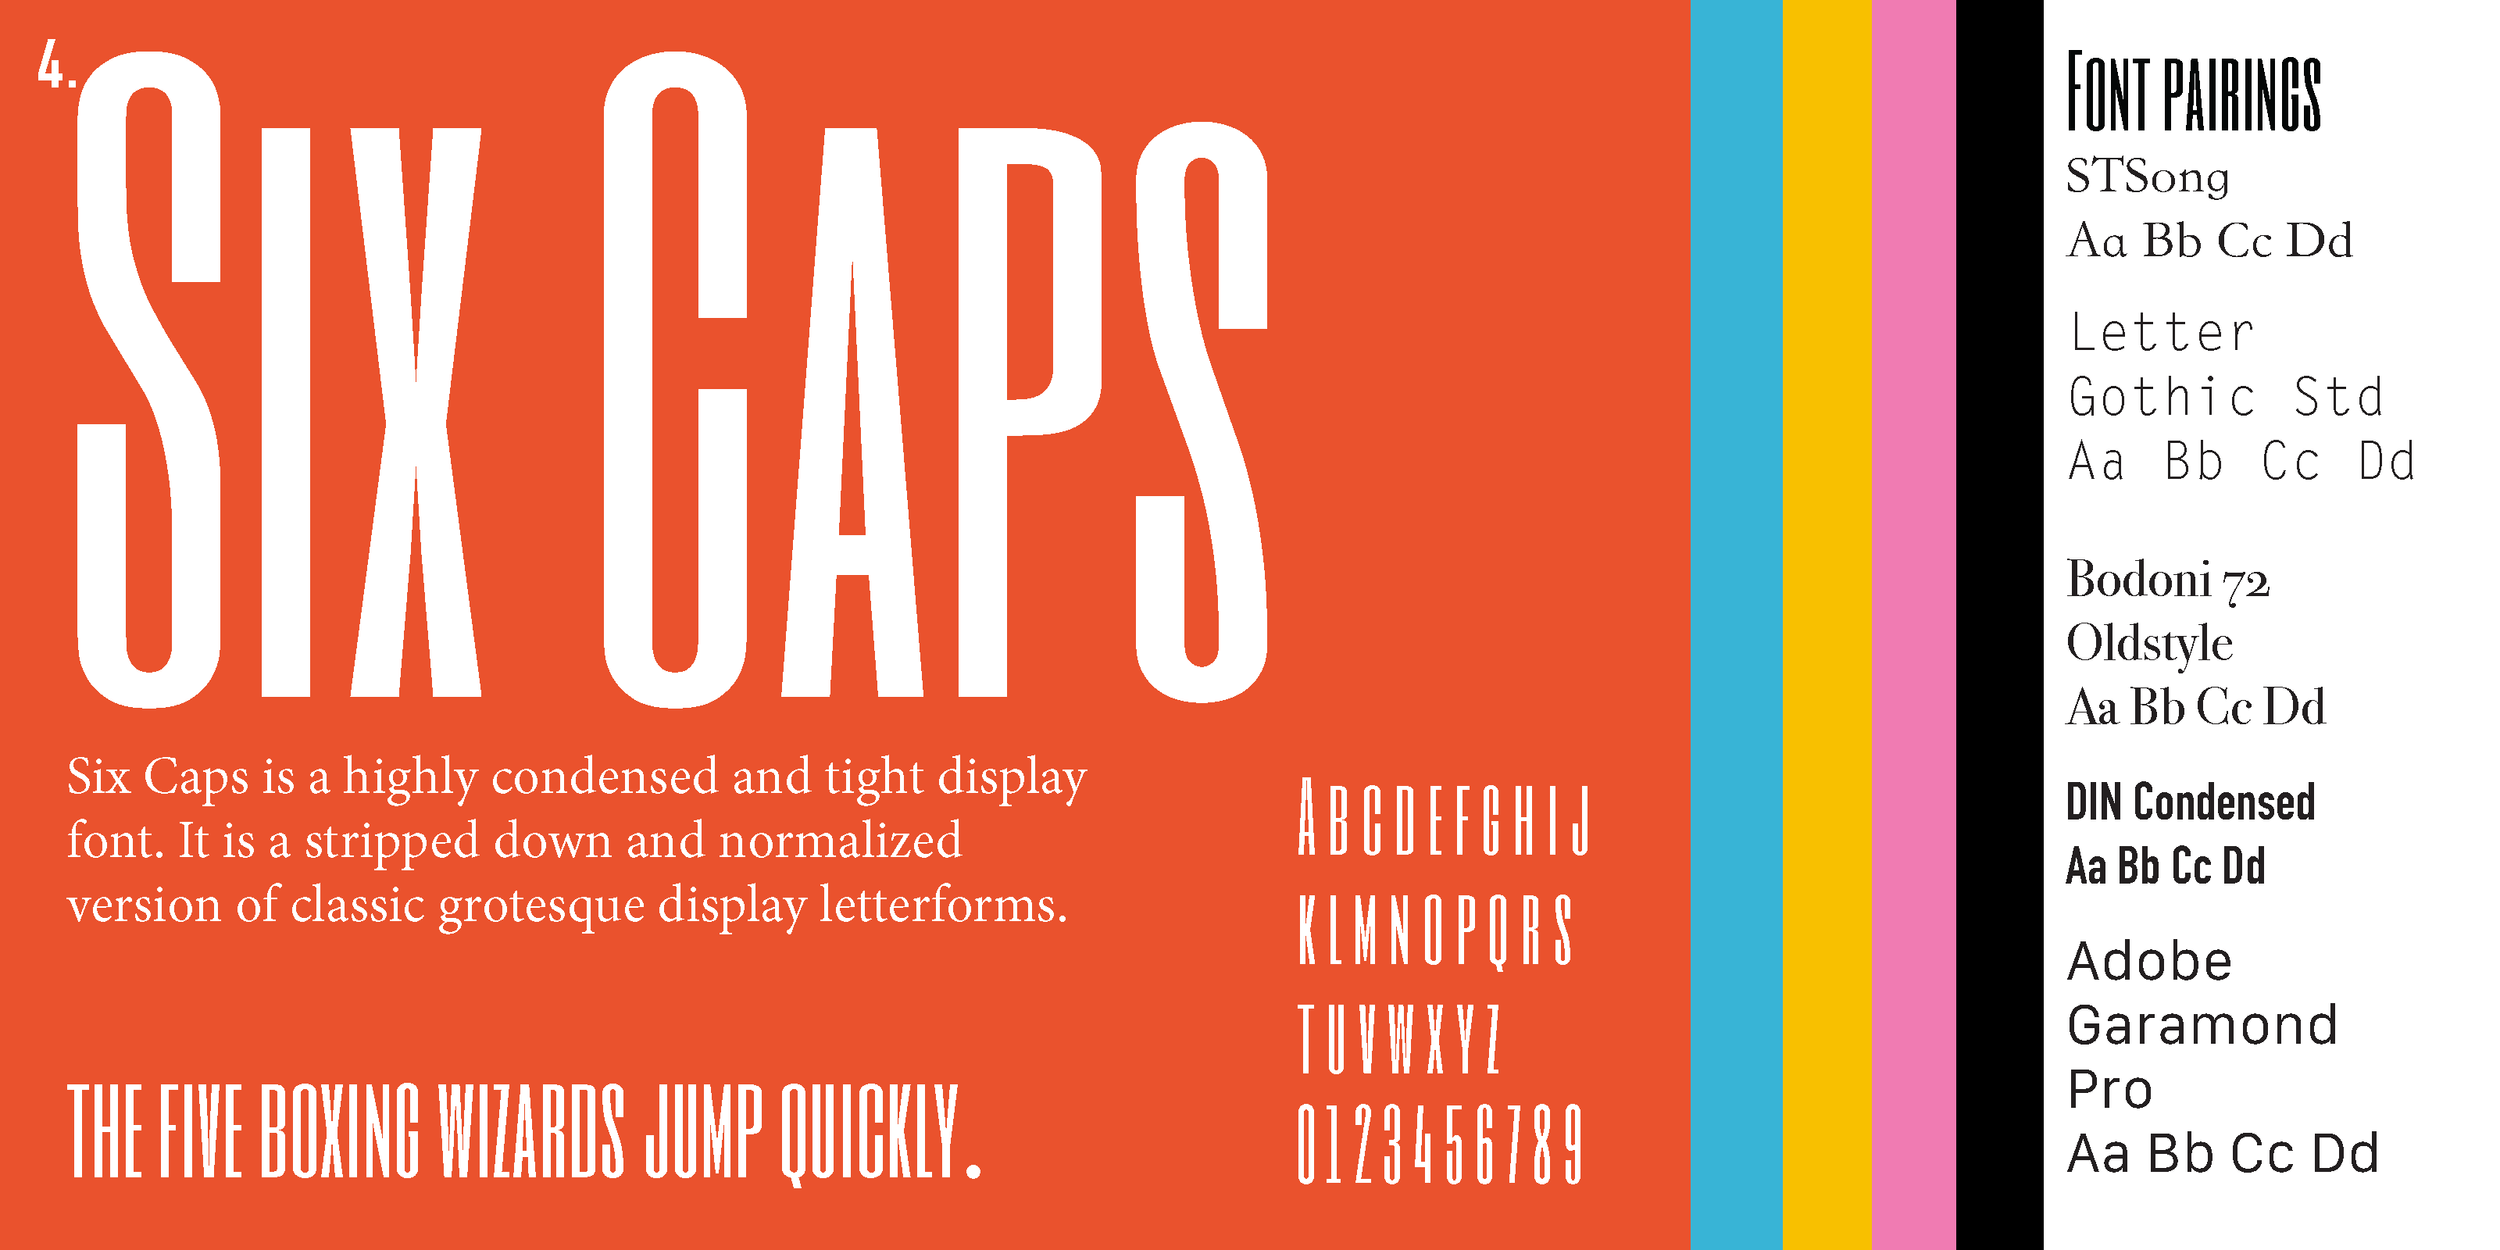 Typeface Booklet